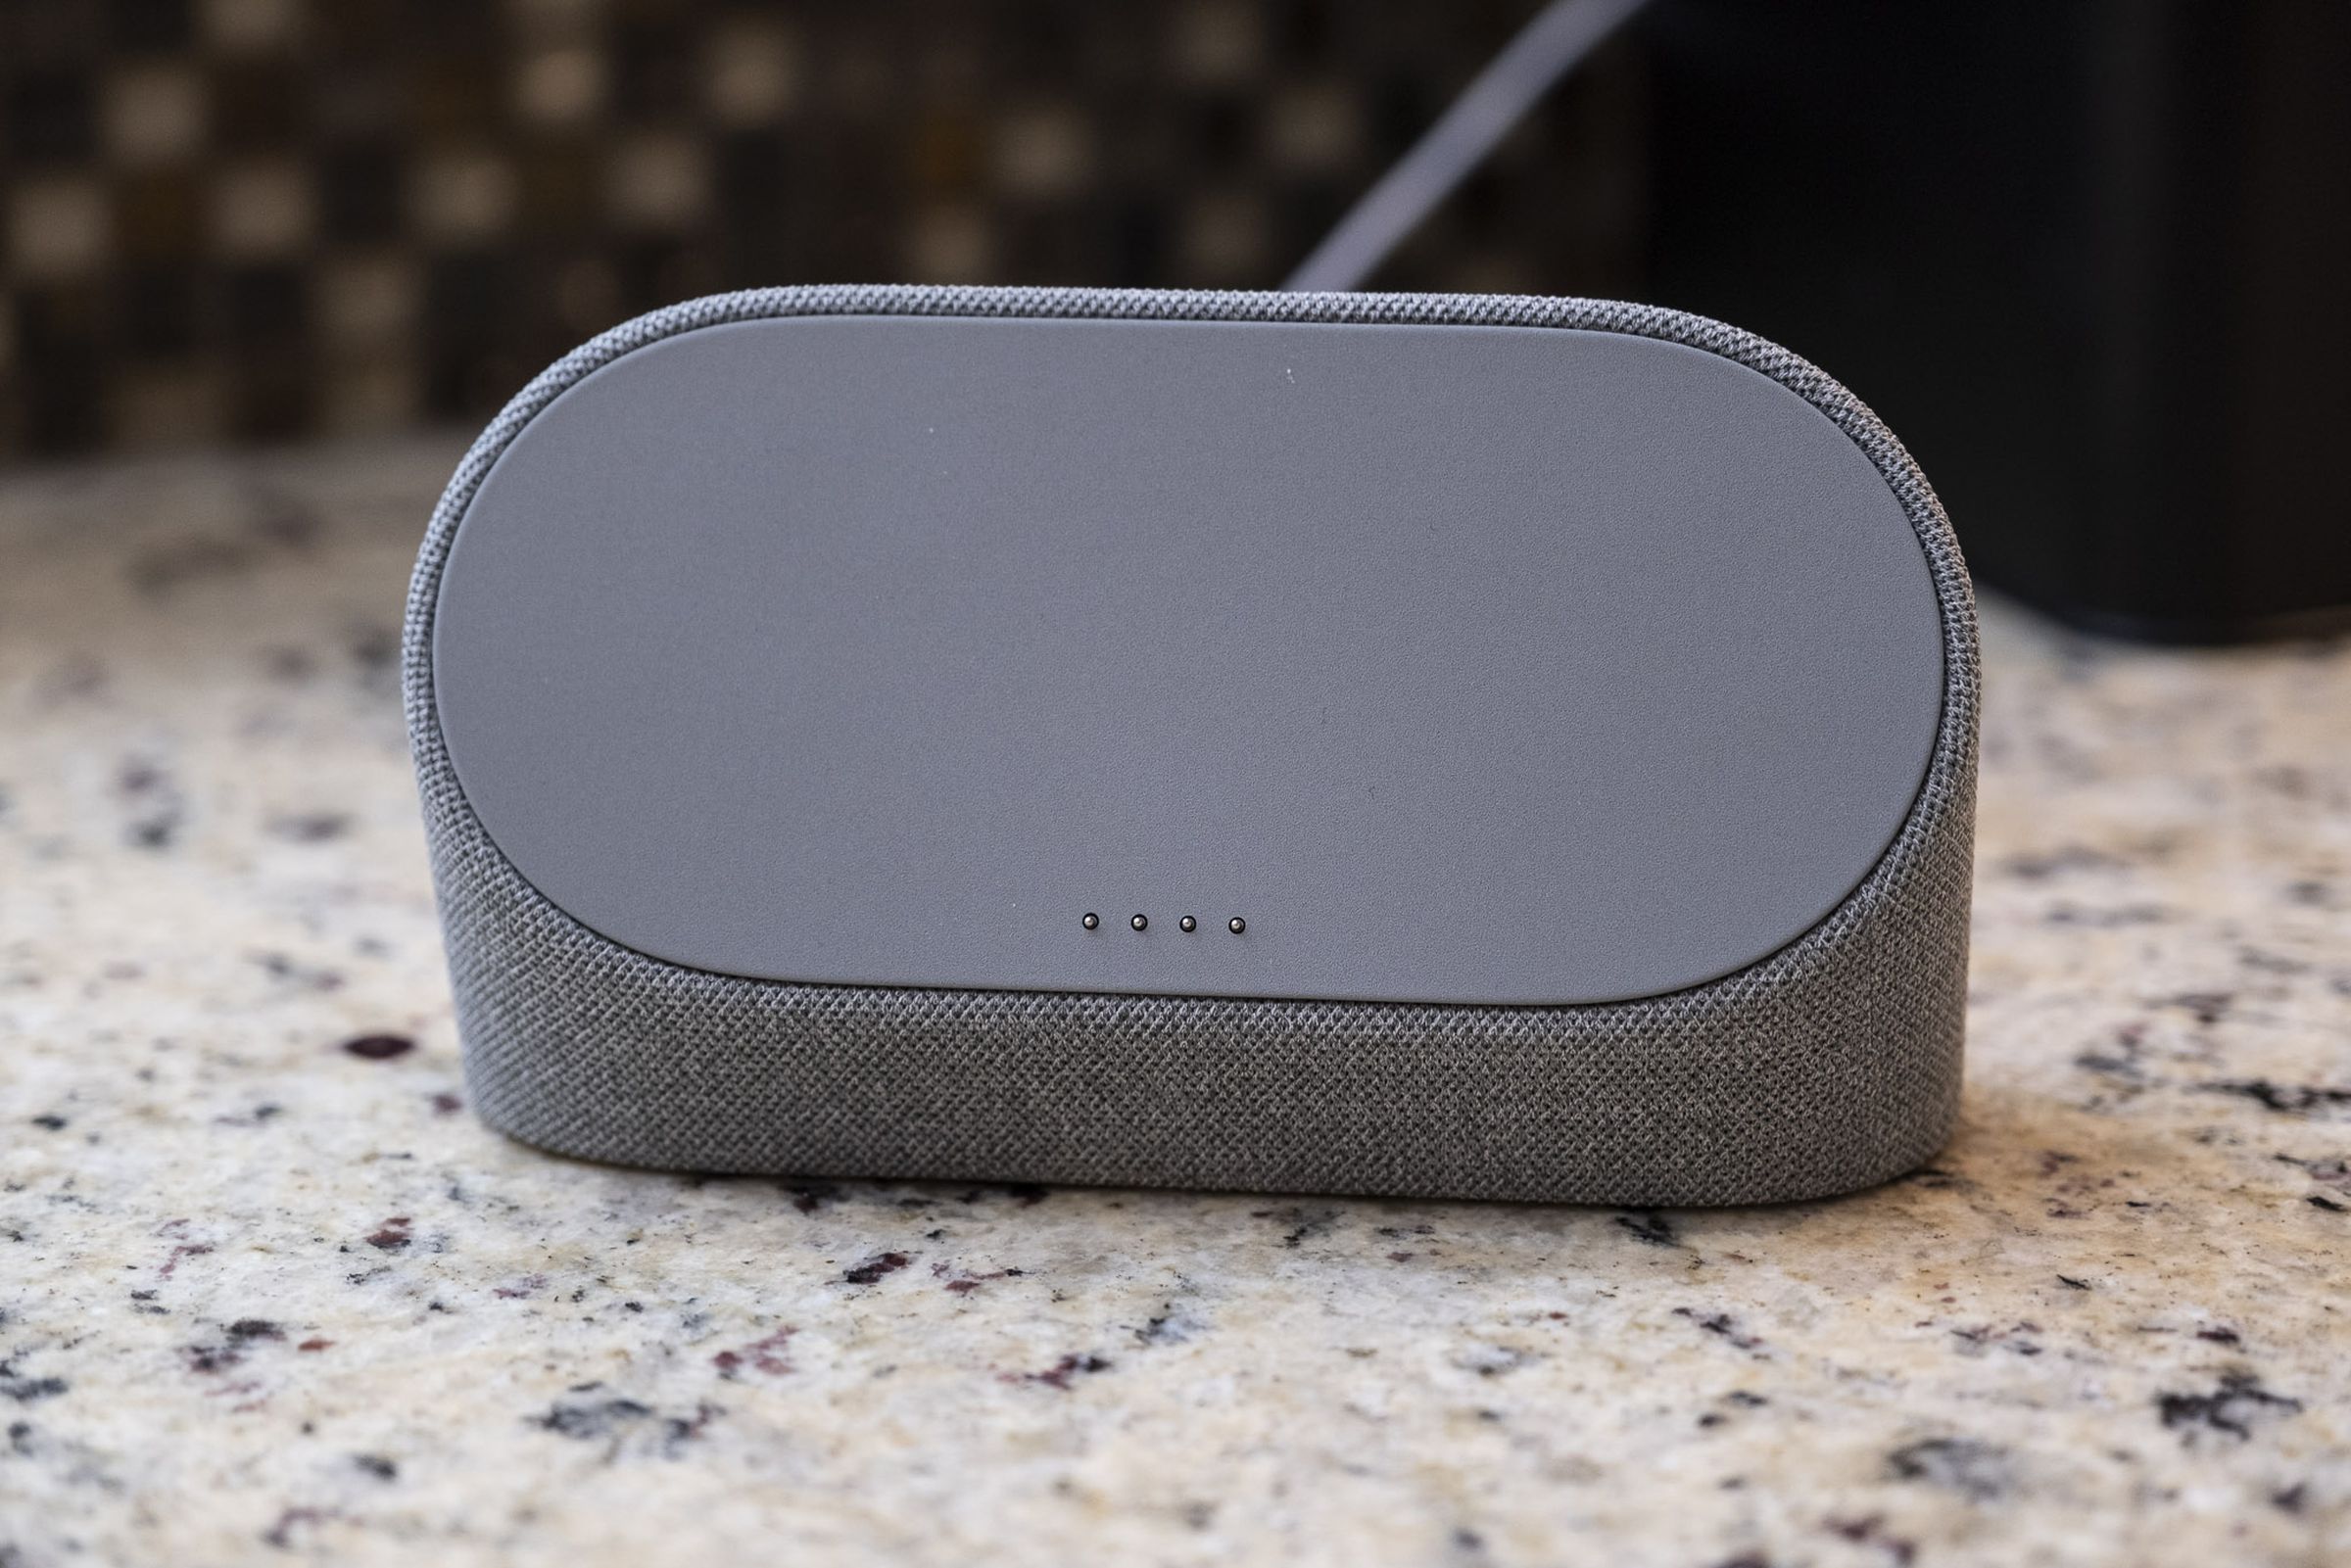 The Pixel Tablet speaker dock without the tablet mounted.